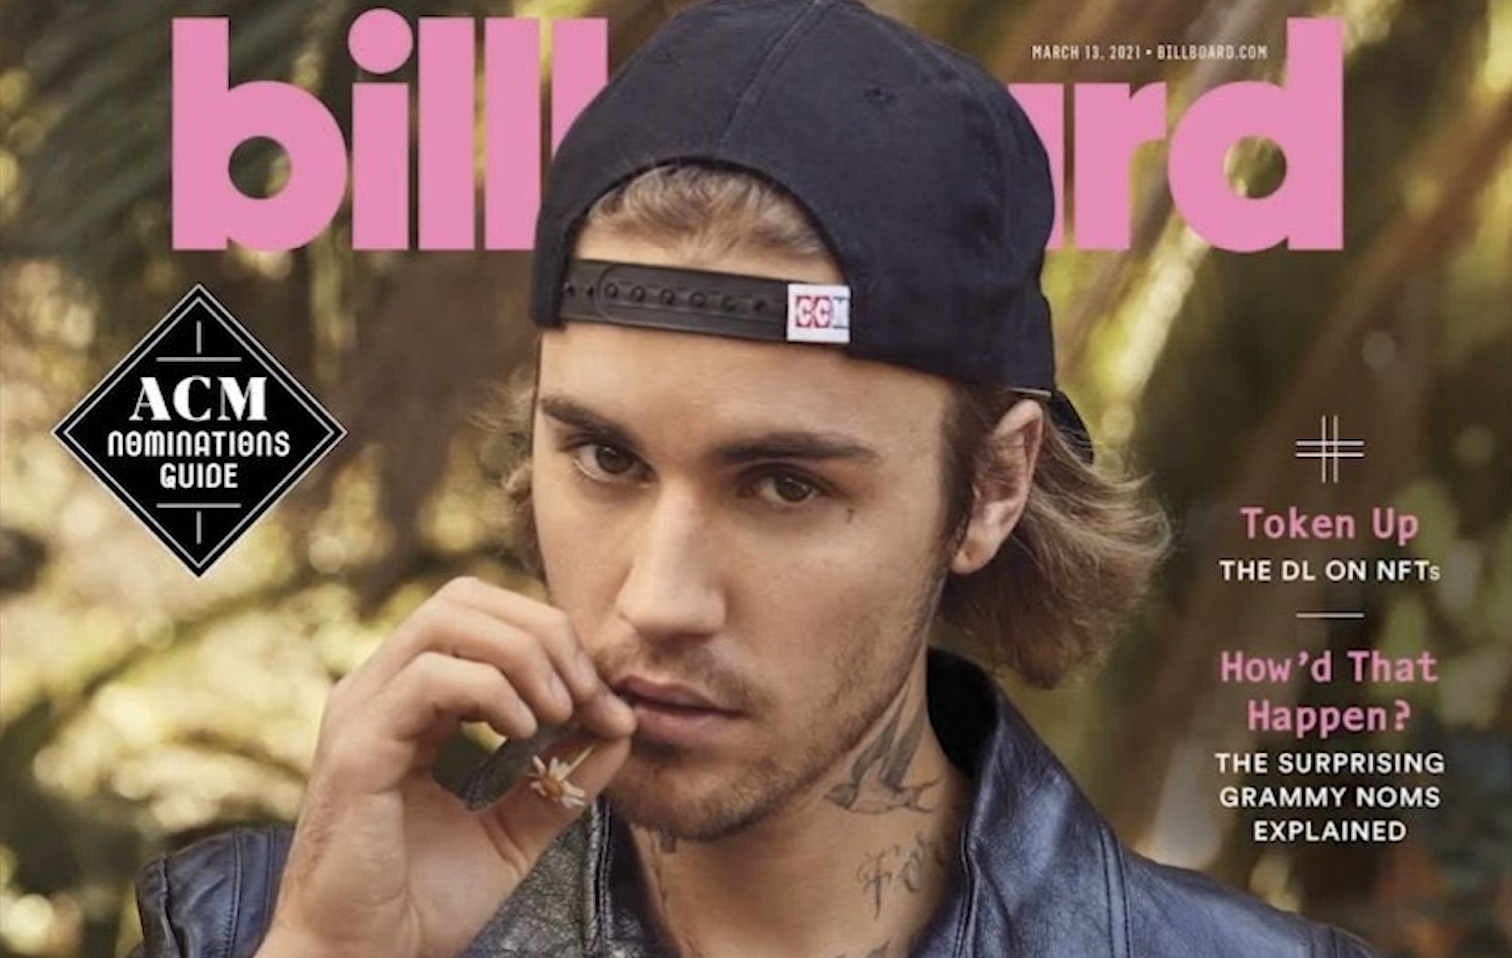 Justin Bieber Covers Billboard’s Spring 2021 Issue